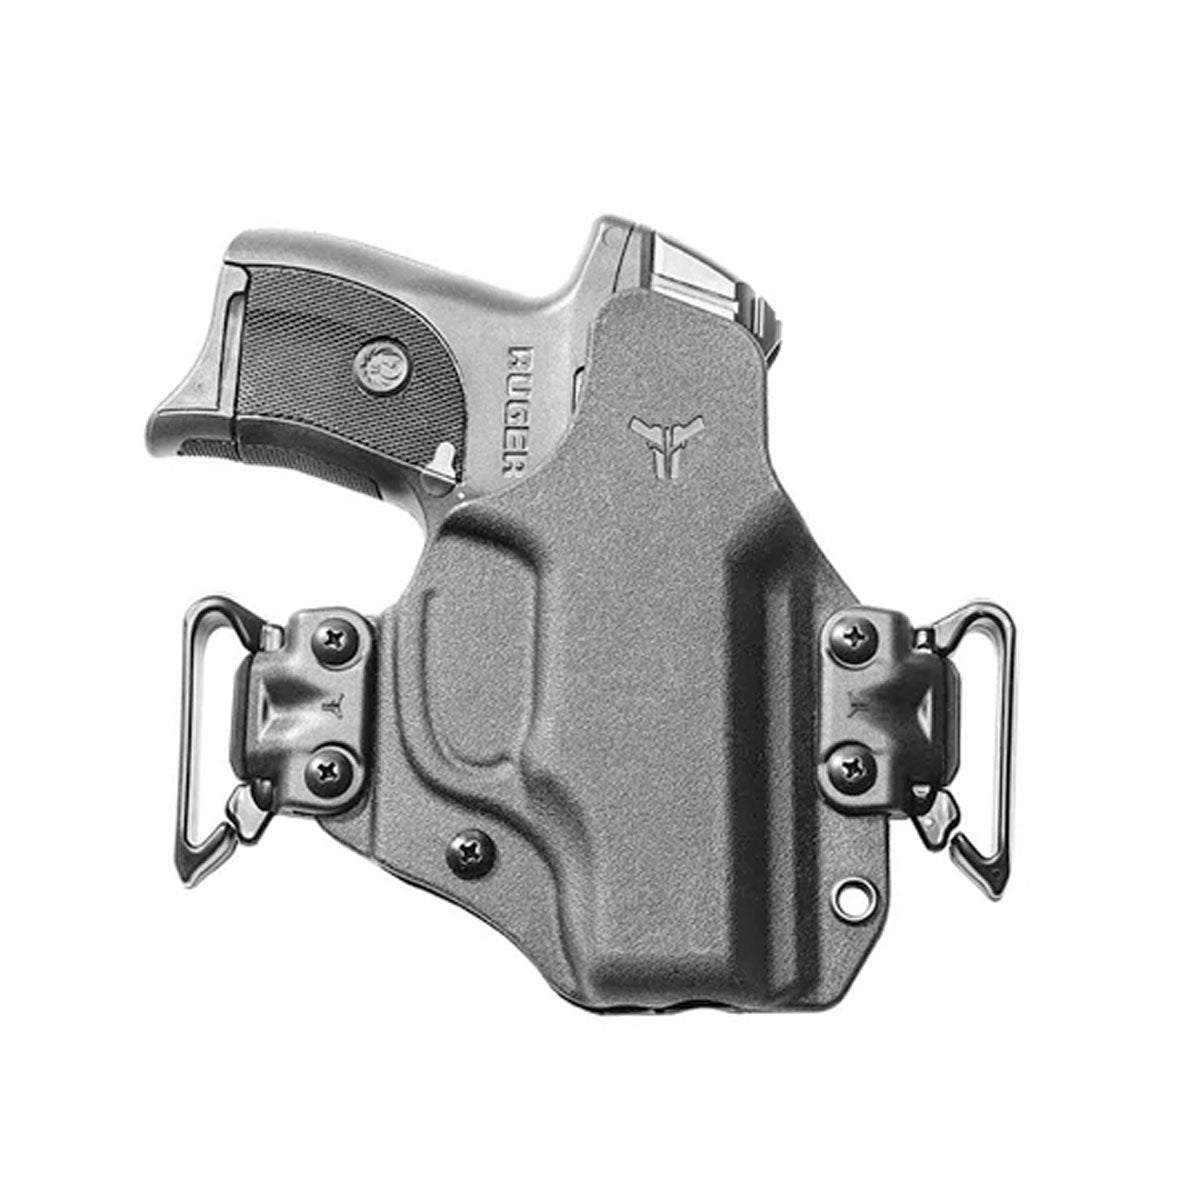 Blade-Tech Total Eclipse 2.0 Modular Holster Ruger - LC9 / LC9S Tactical Distributors Ltd New Zealand